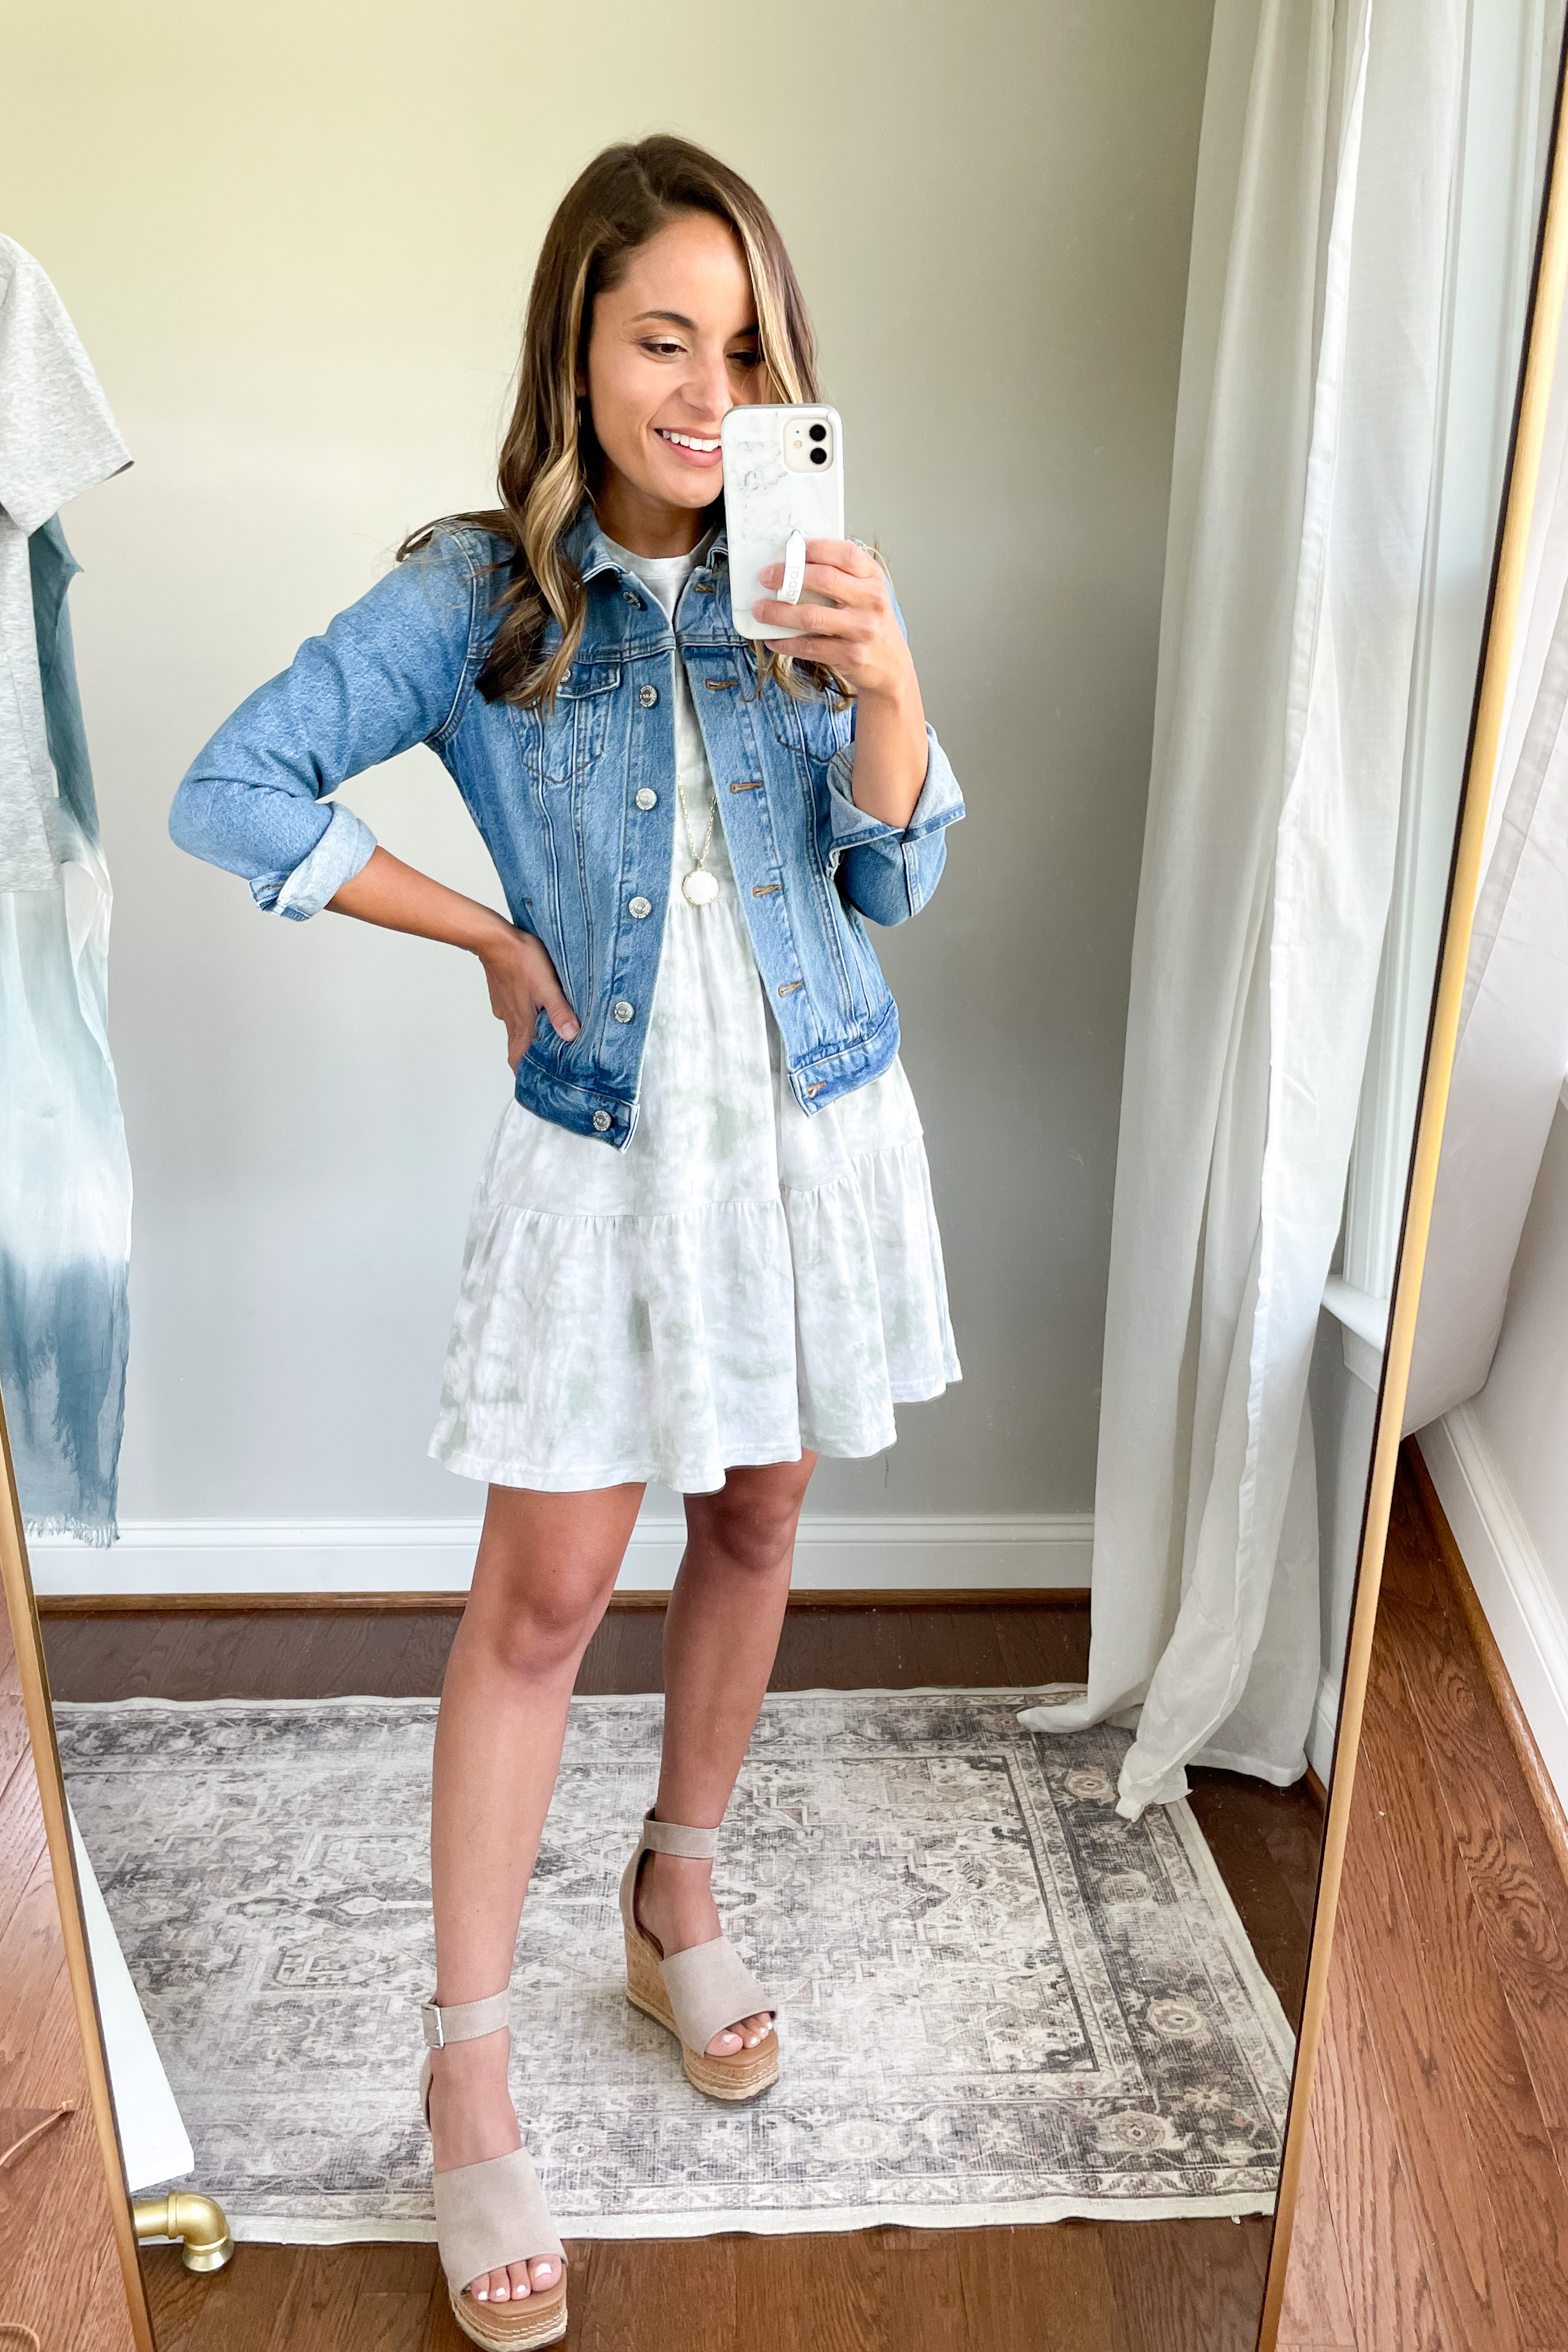 10 Items 20+ Summer Outfits - Pumps & Push Ups